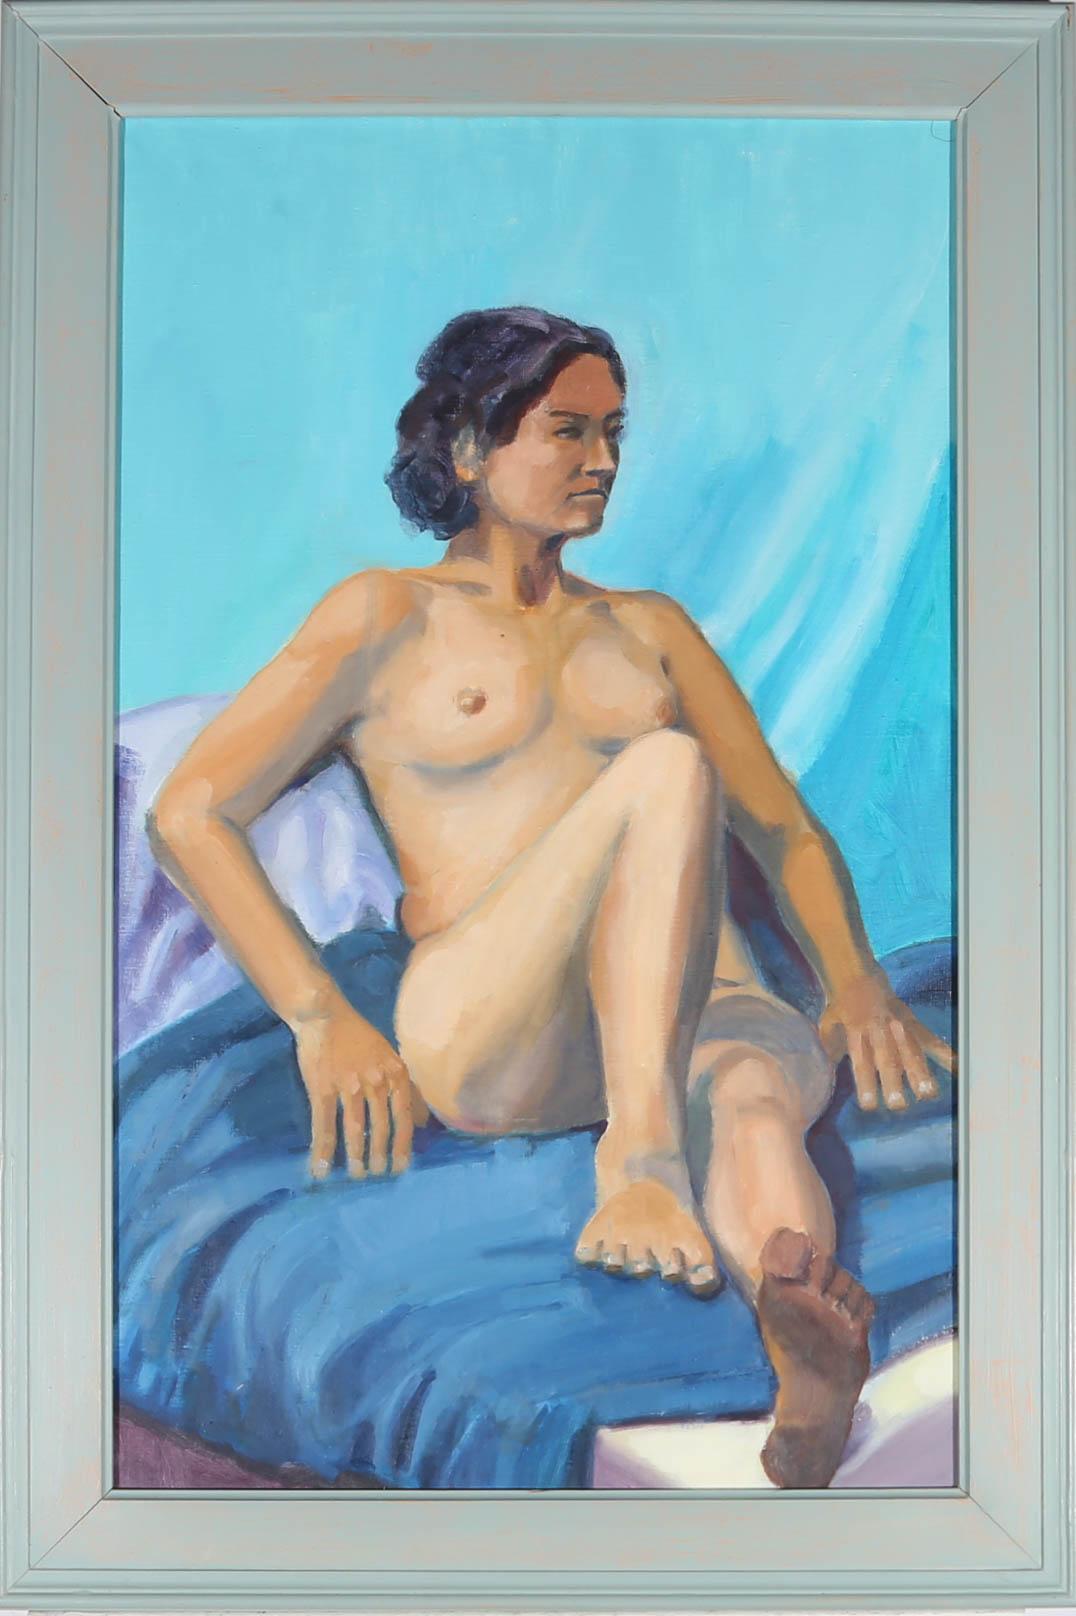 A striking study of a nude model reclining on blue linen against a bright blue backdrop. The artist uses a more natural palette to capture the model, juxtaposing her bright surroundings. Unsigned. Presented in a blue painted wooden frame. On canvas.